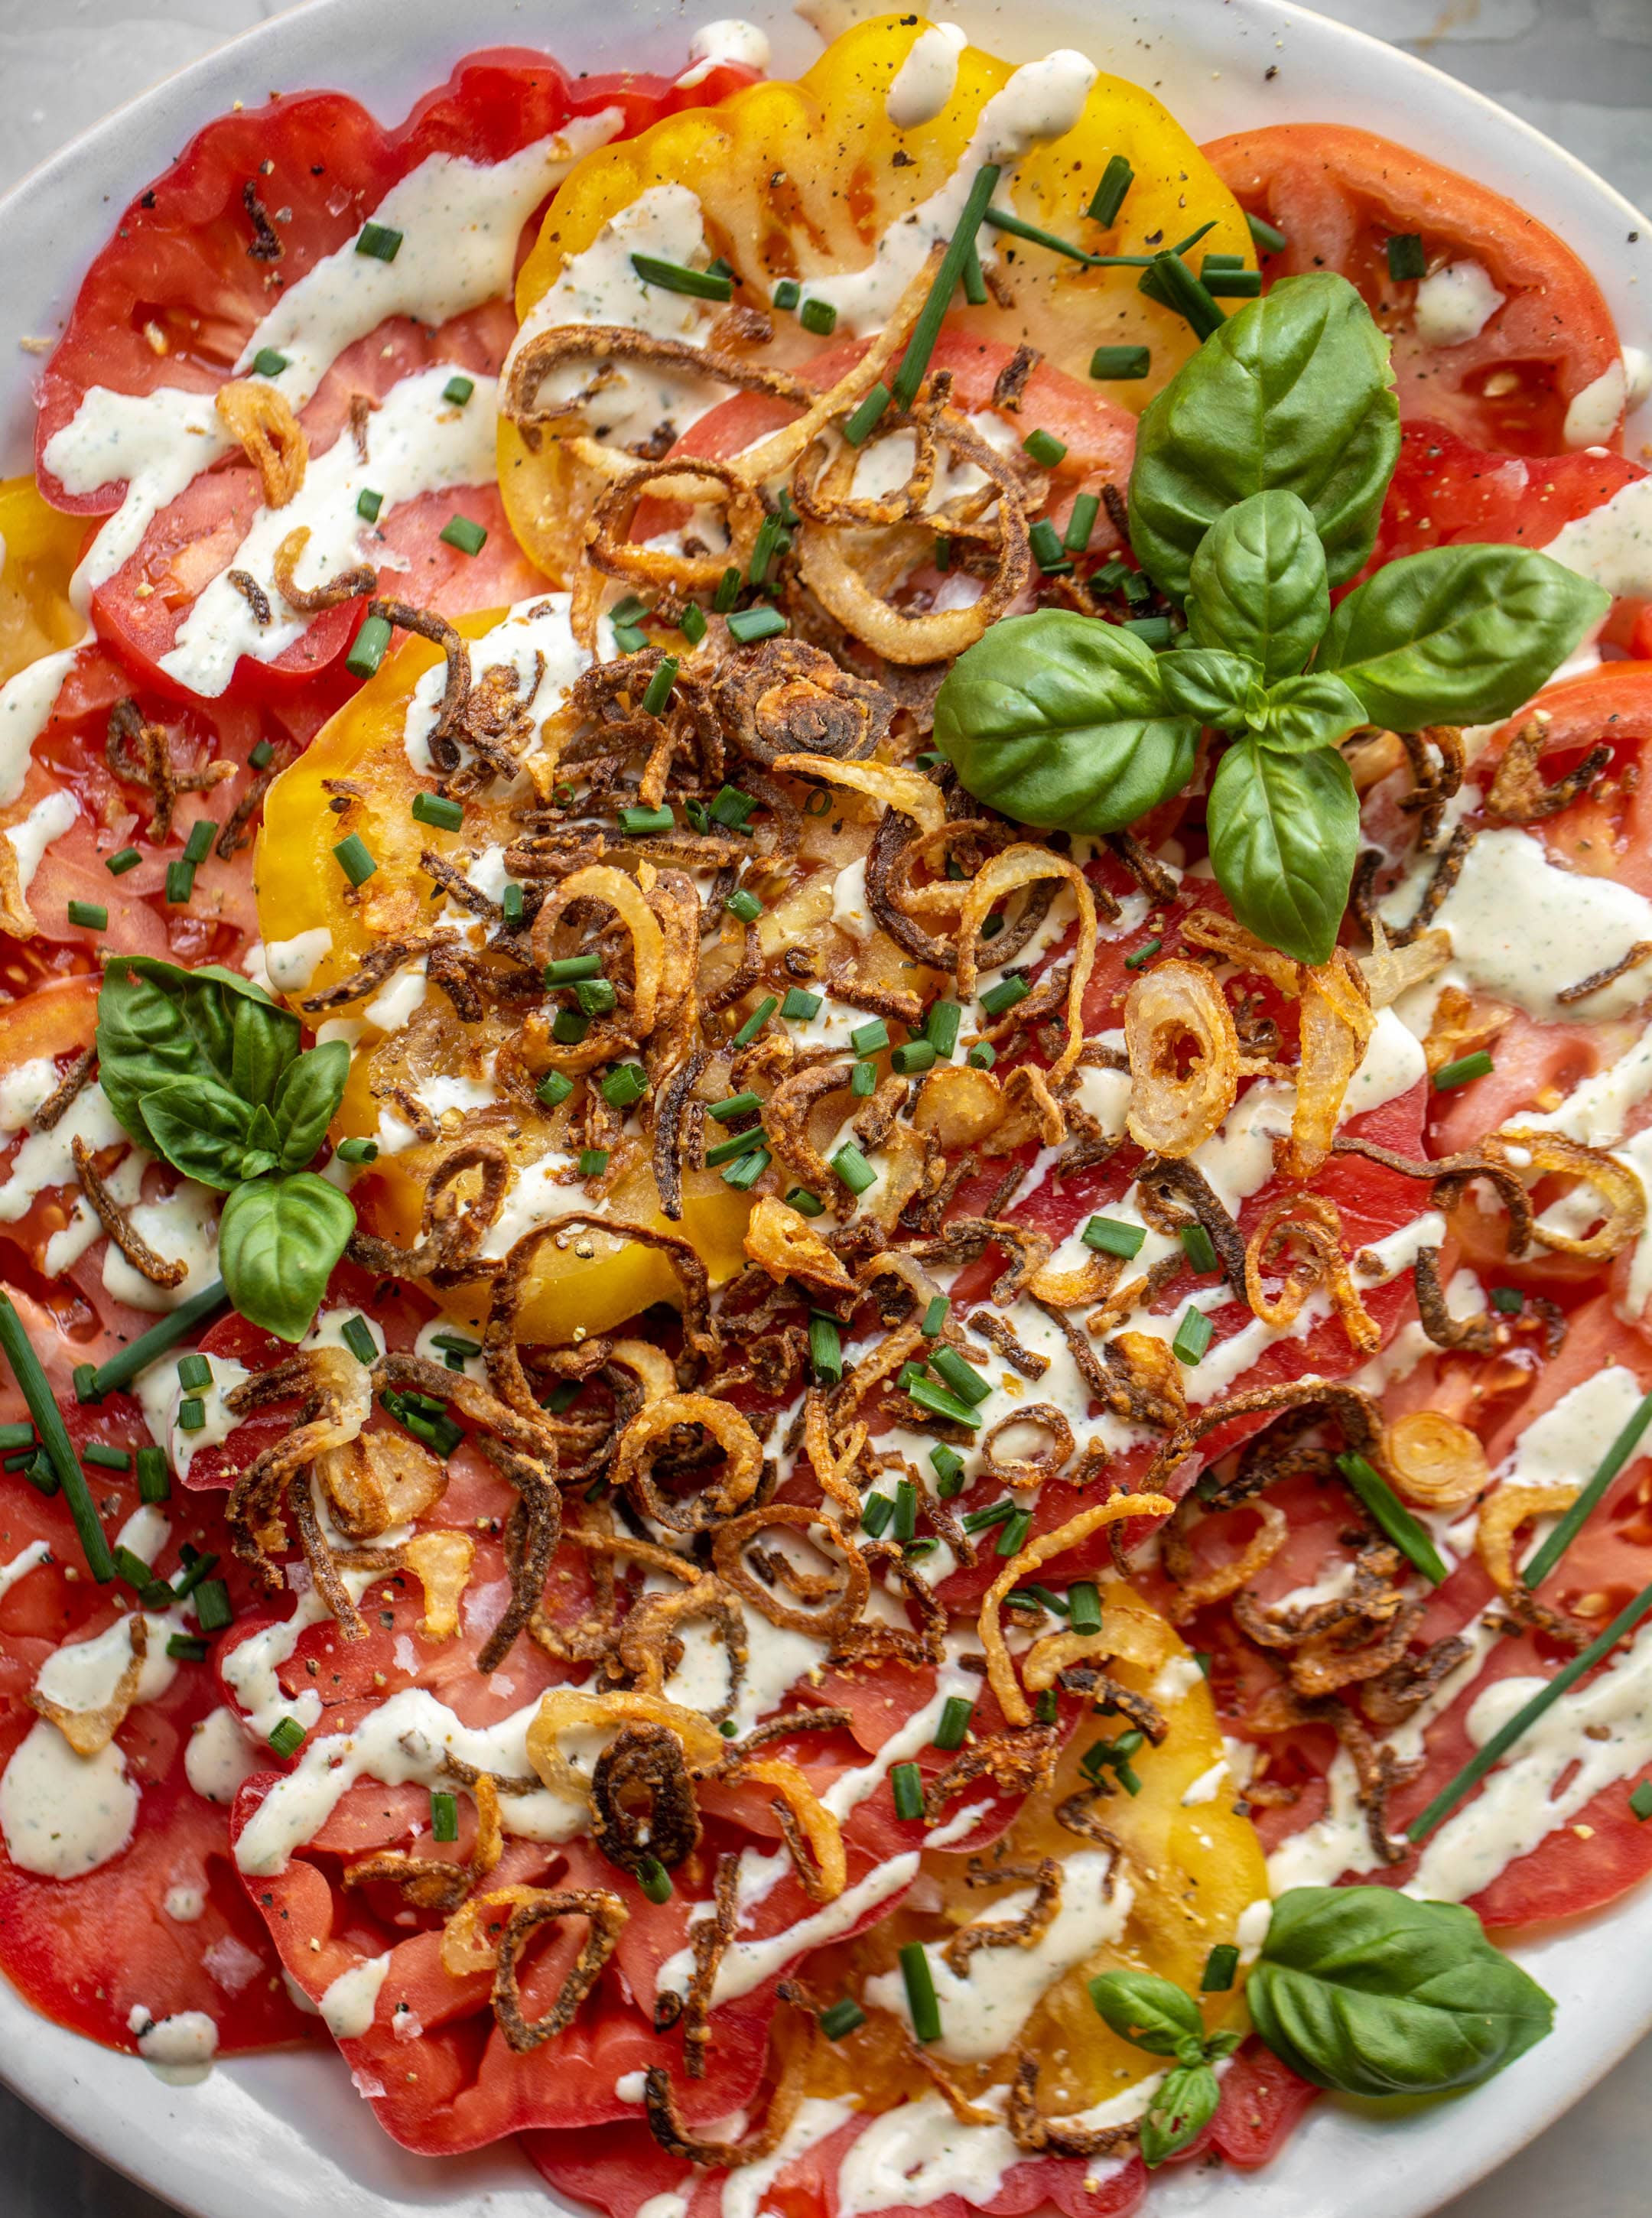 heirloom tomato salad with buttermilk ranch and crispy shallots